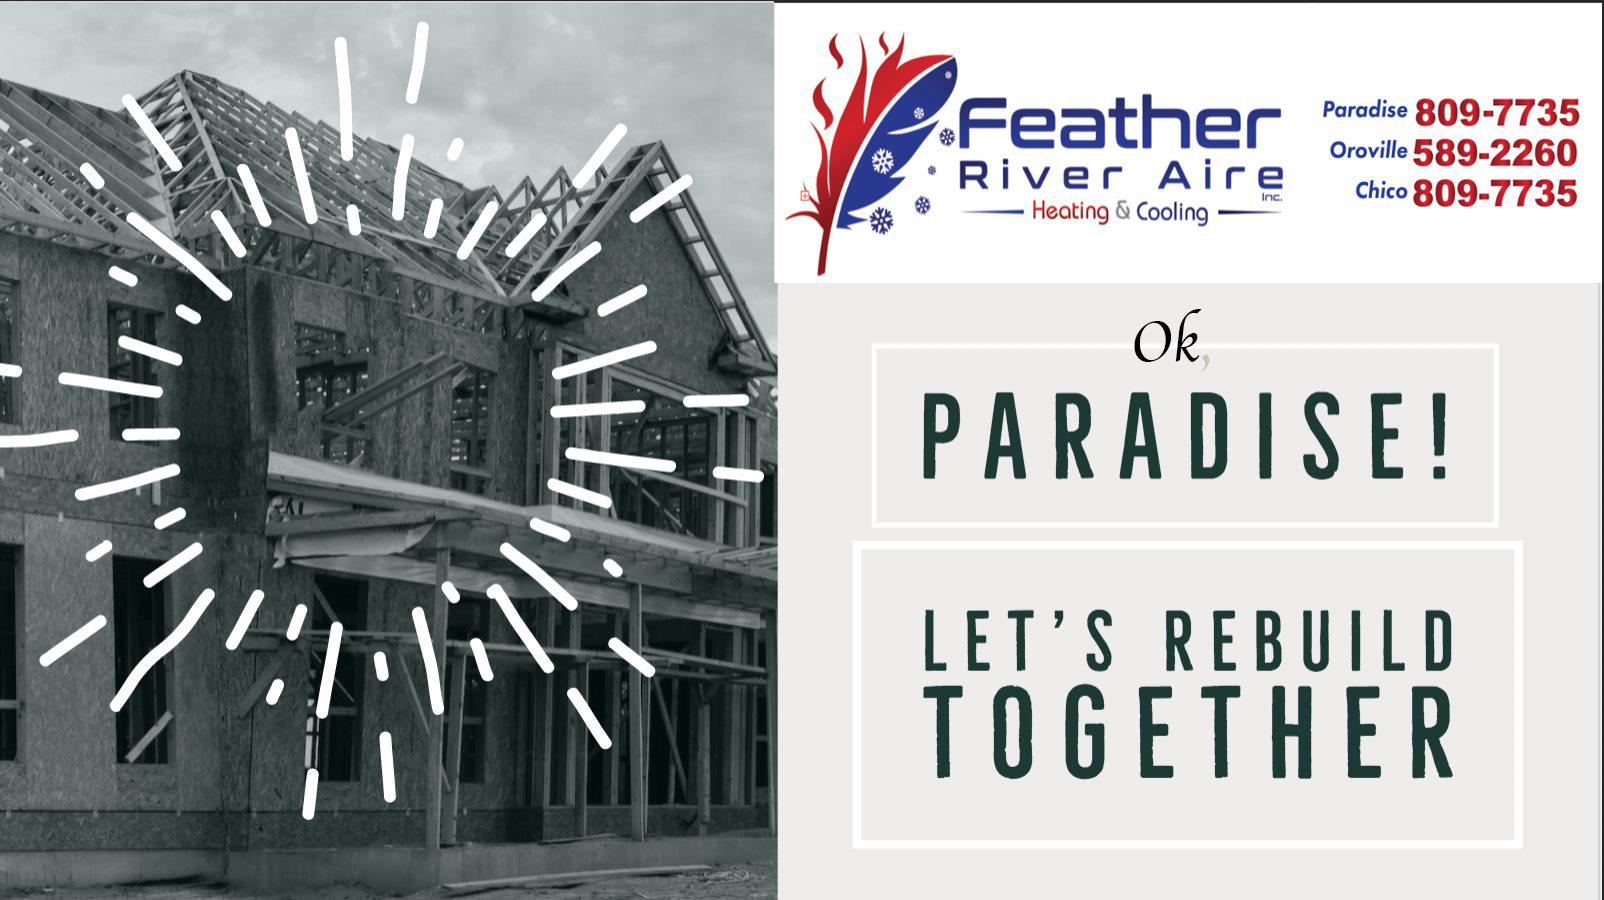 Feather River Aire Heating & Cooling Photo